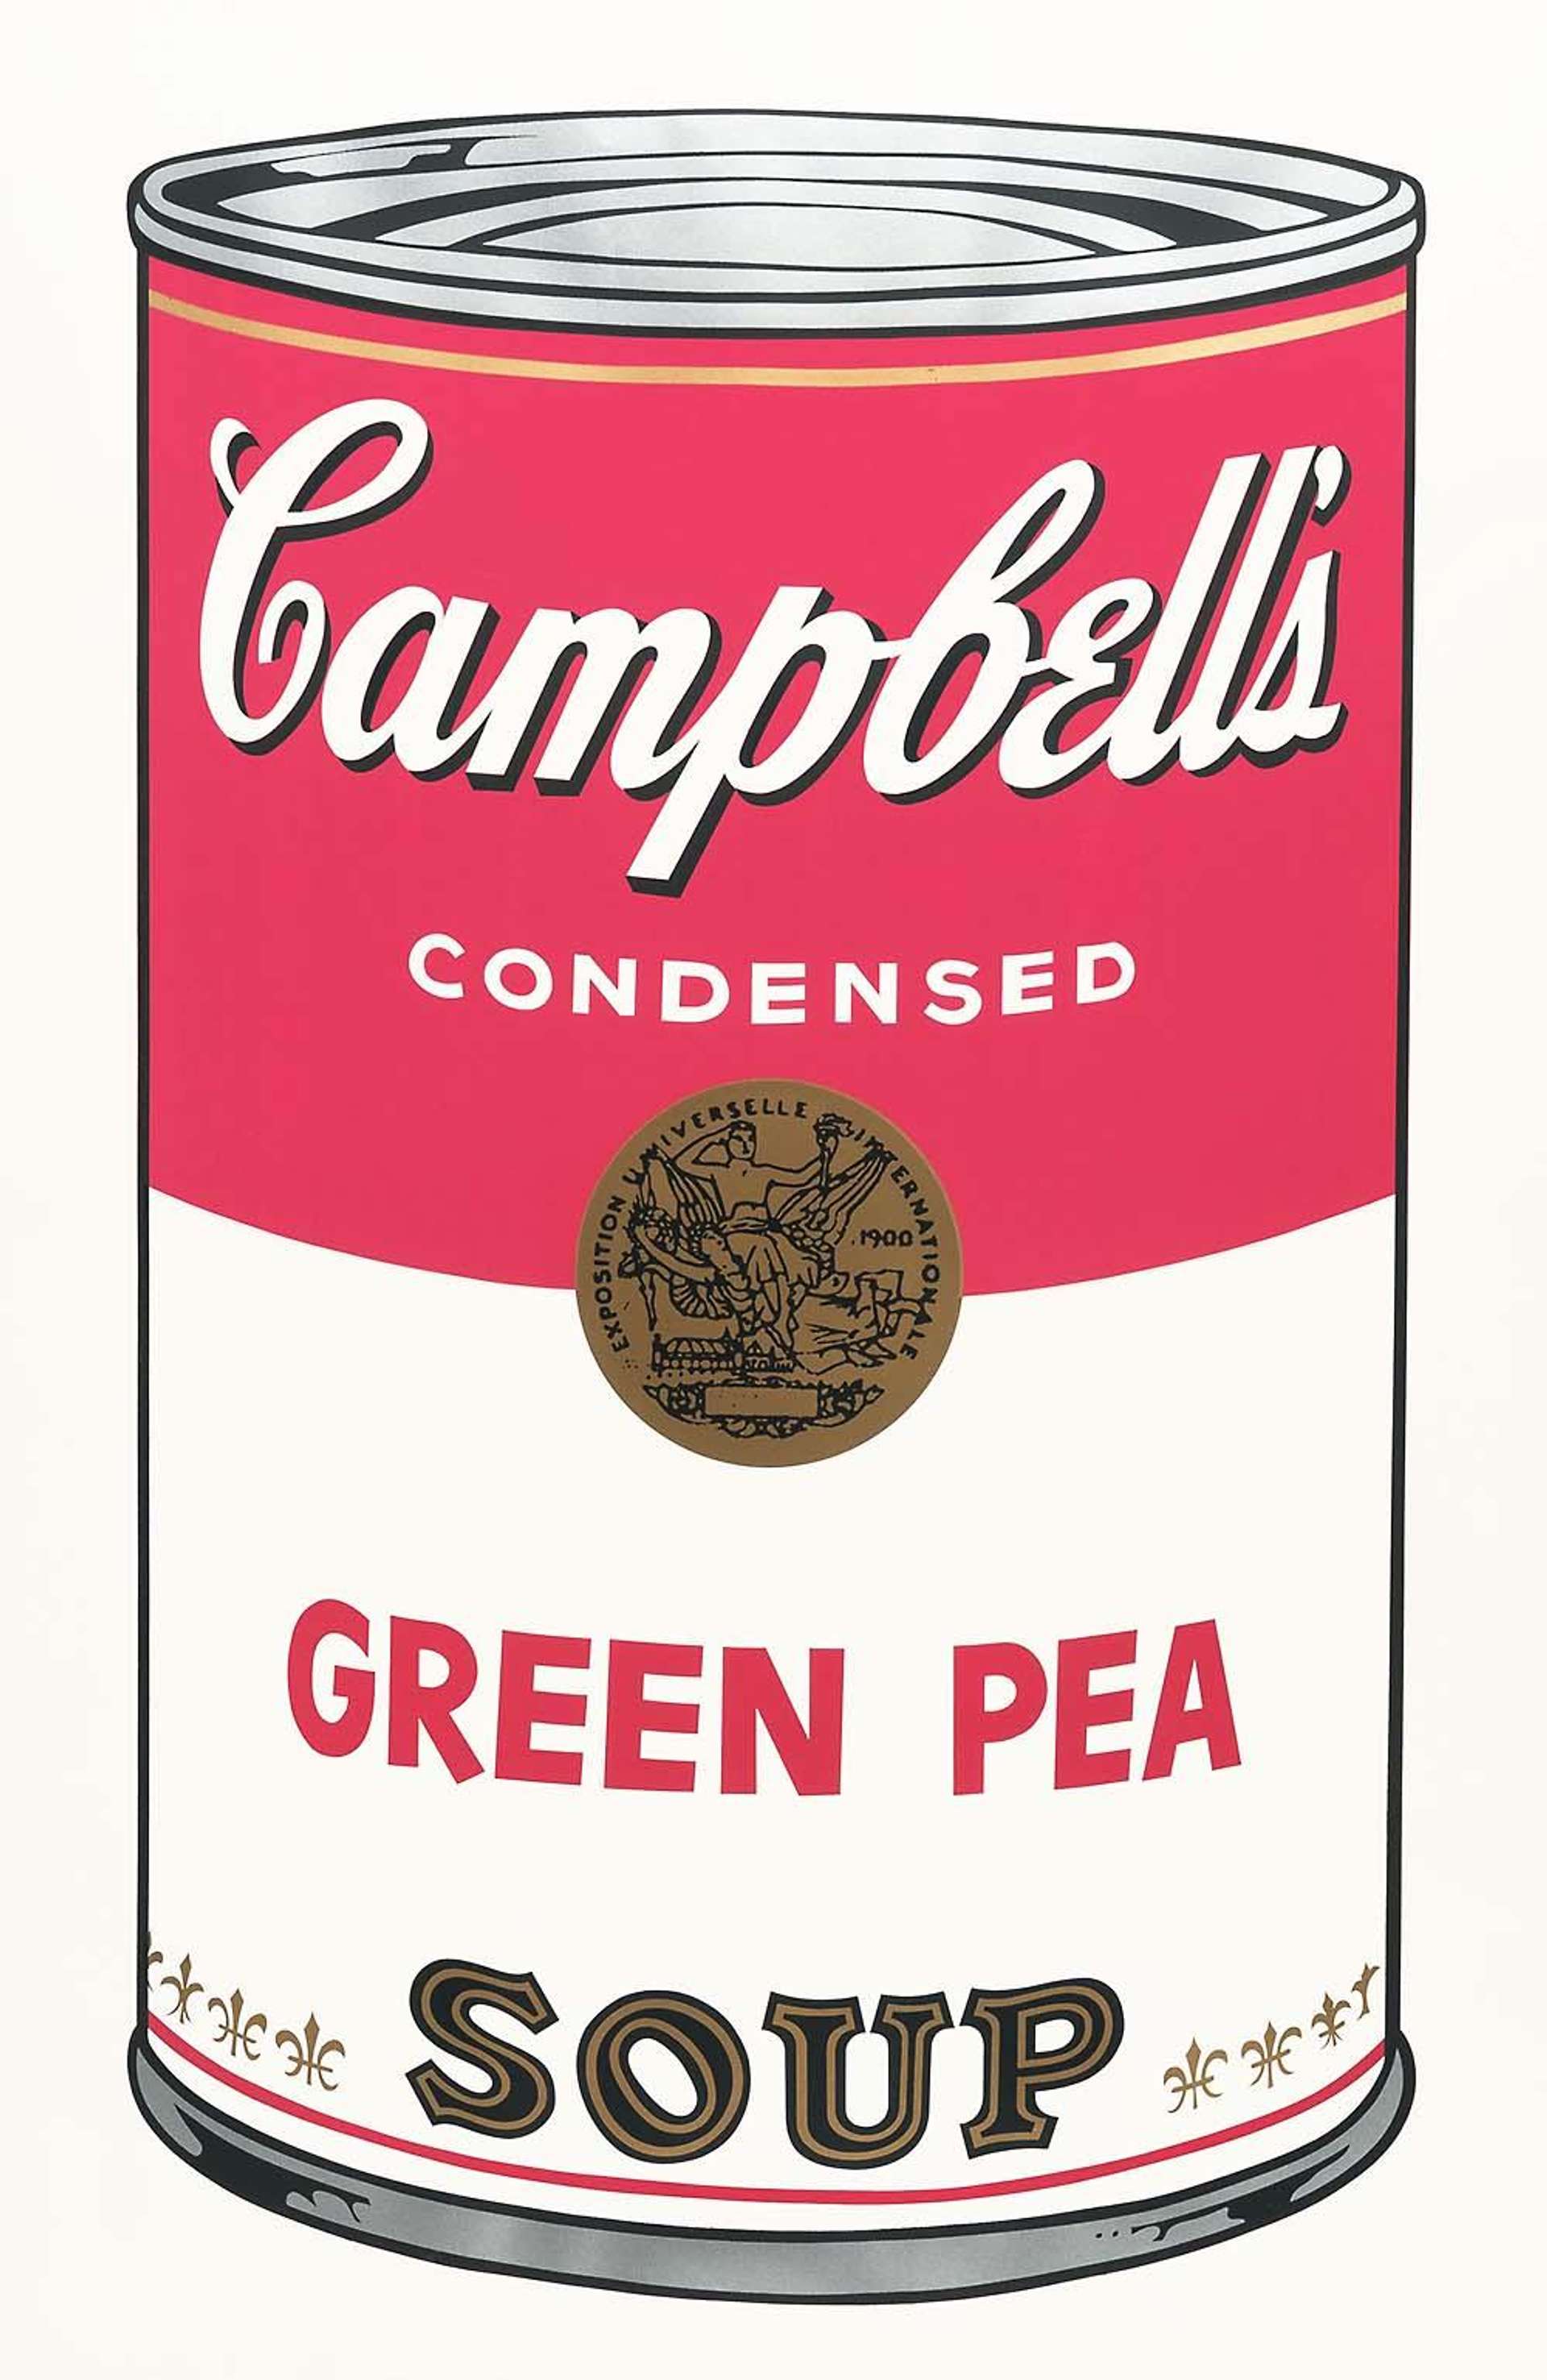 Campbell’s Soup I, Green Pea (F. & S. II.50) - Signed Print by Andy Warhol 1968 - MyArtBroker